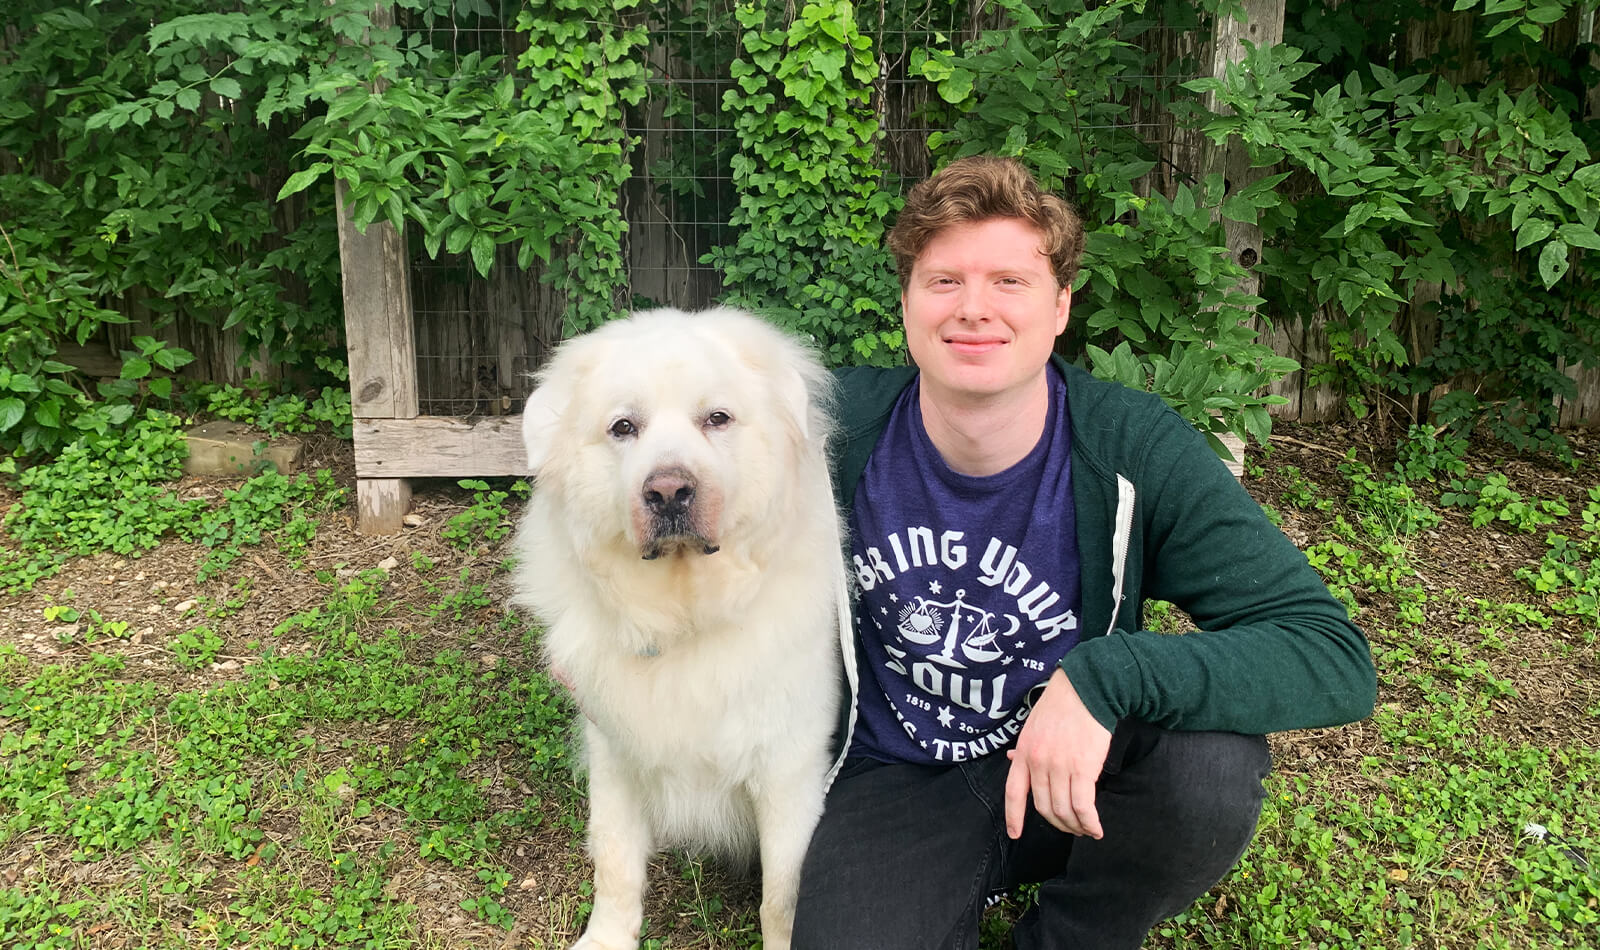 Joseph kneeling down with his Great Pyrenees.